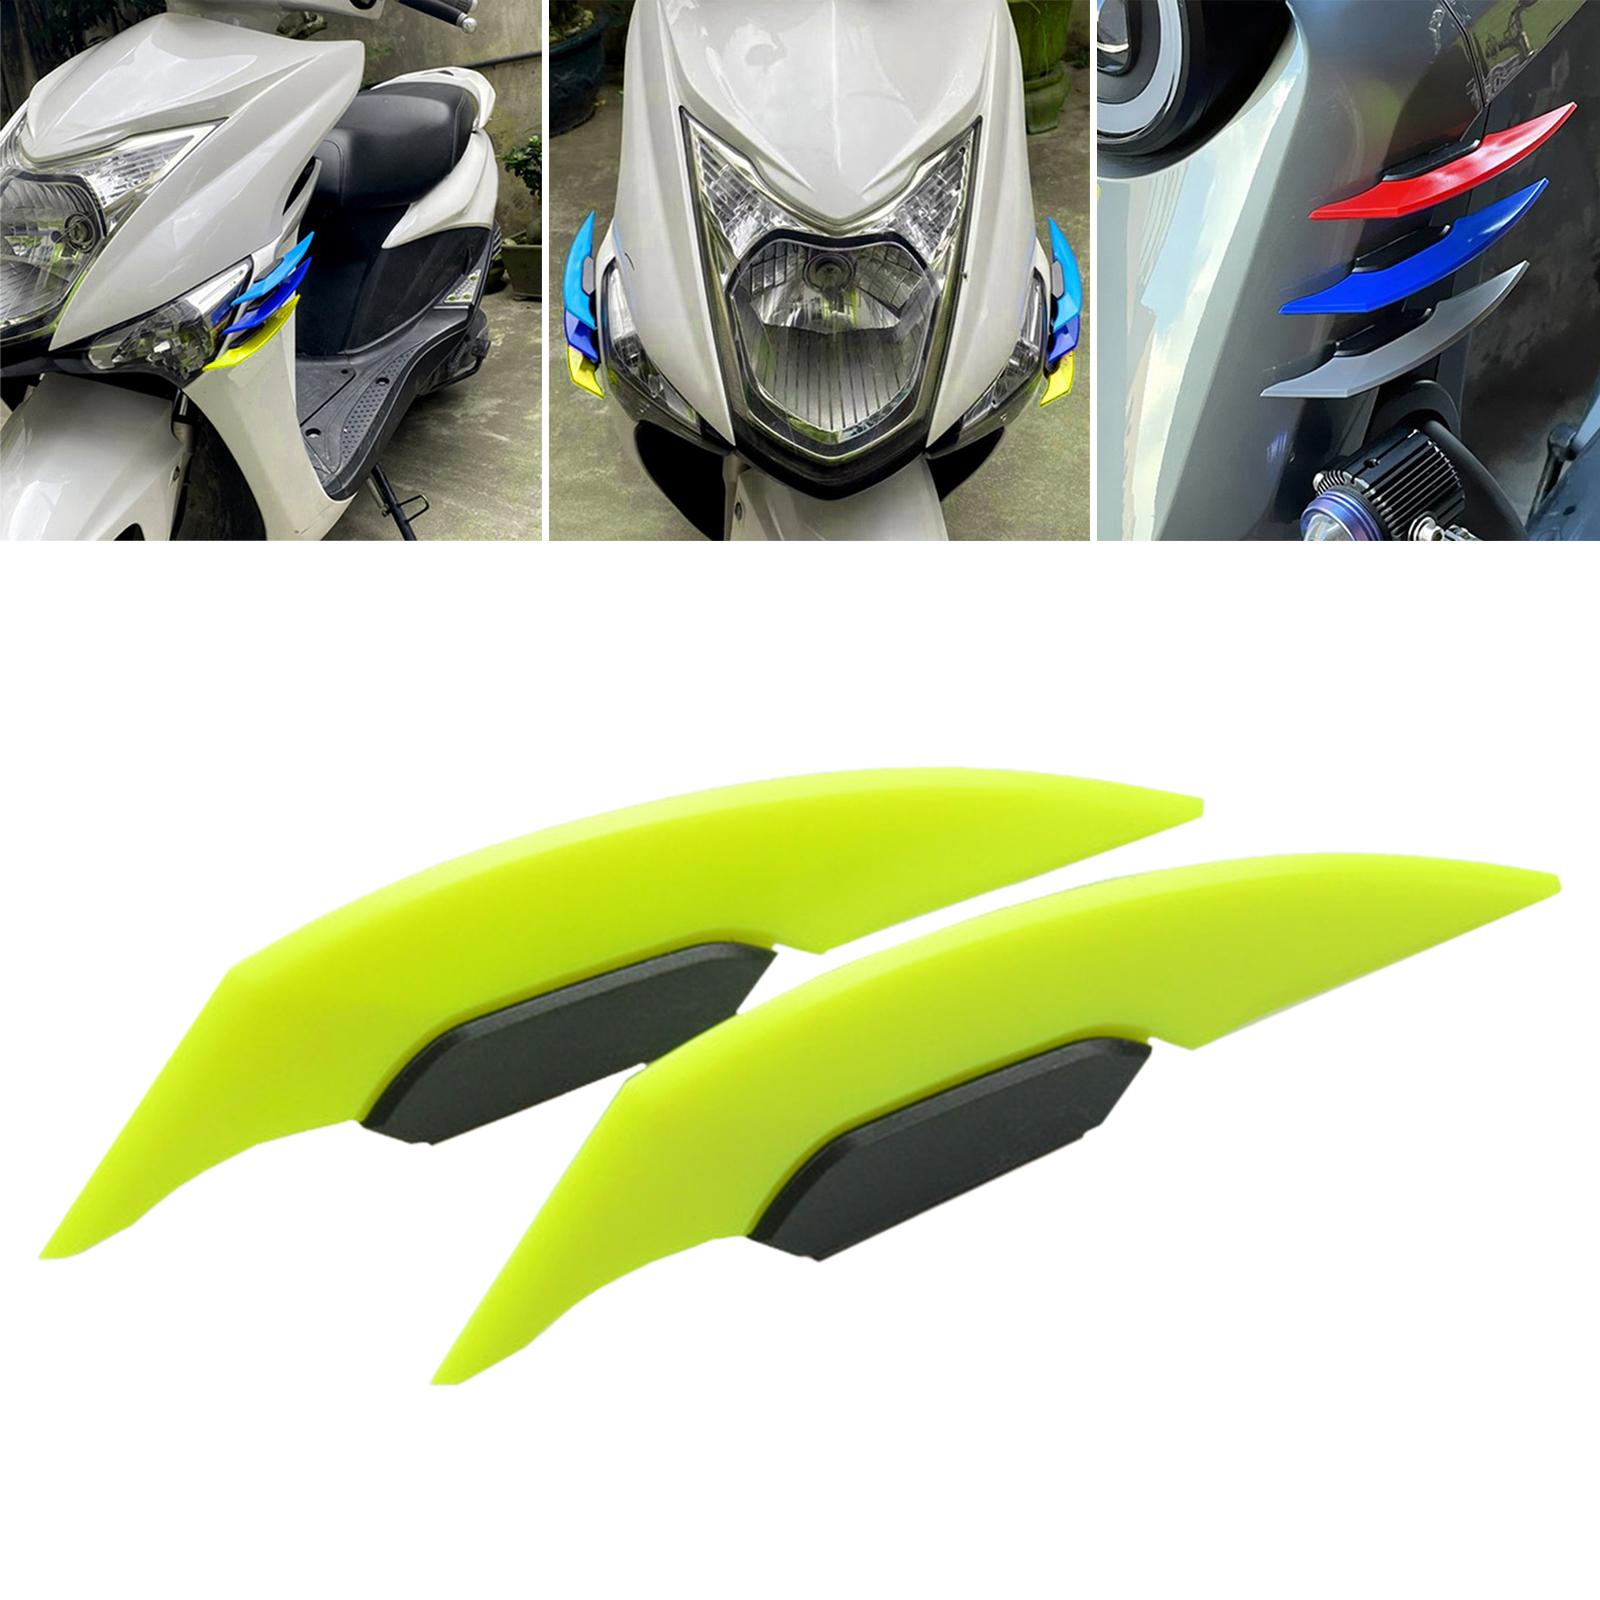 Motorcycle Winglet Aerodynamic Spoiler Wing Fit for Electric Motorcycles Yellow